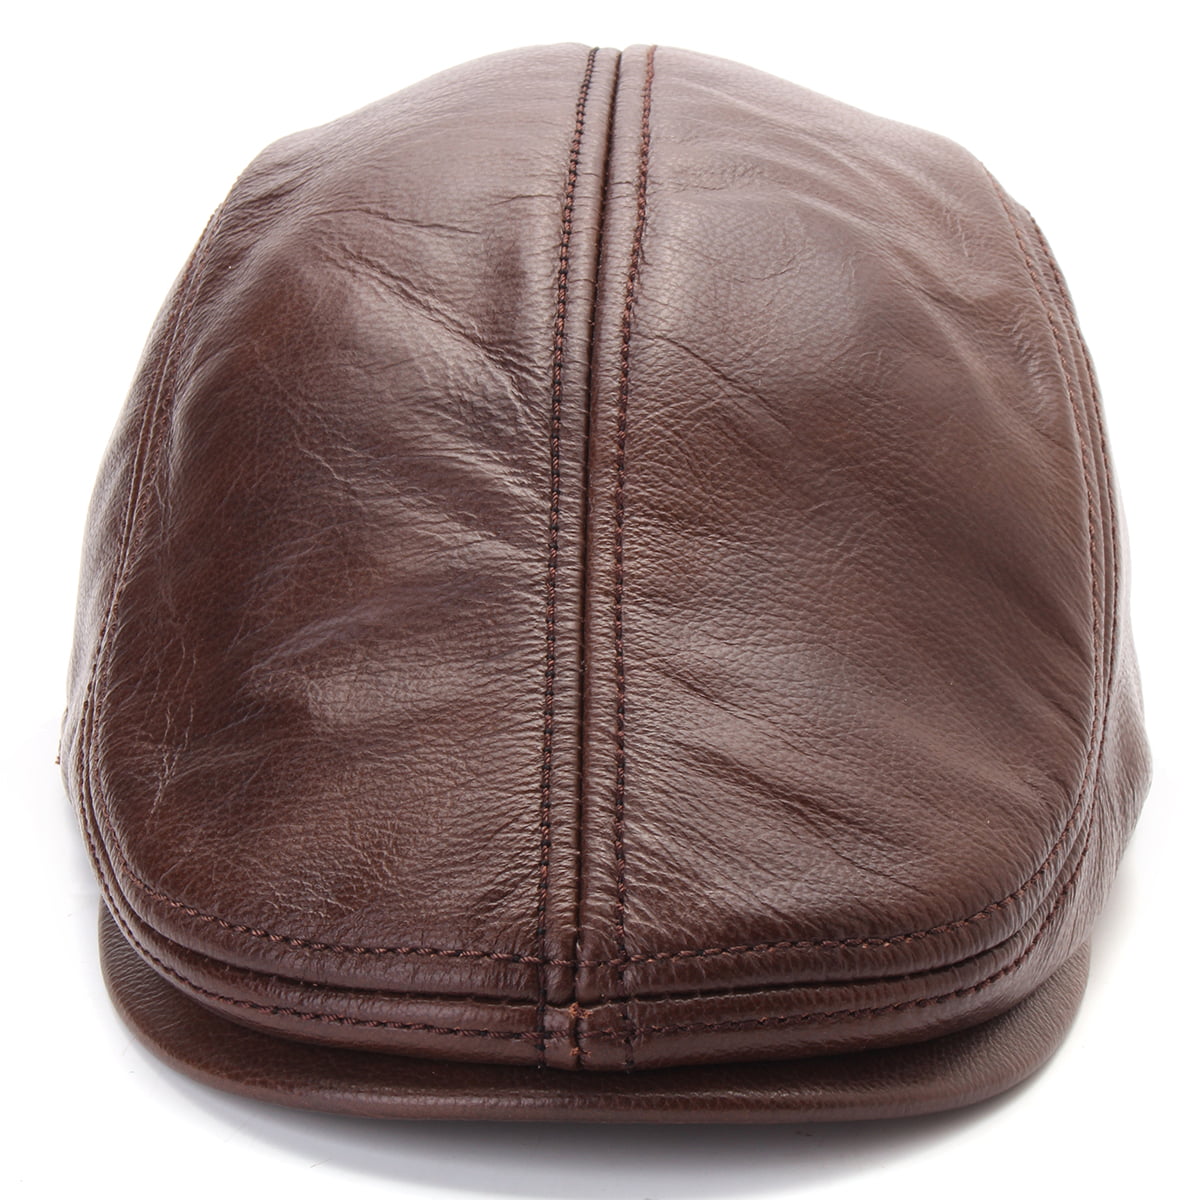 Men's Winter Real Leather Newsboy Golf Hat Beret Cabbie Baker Cap With ...